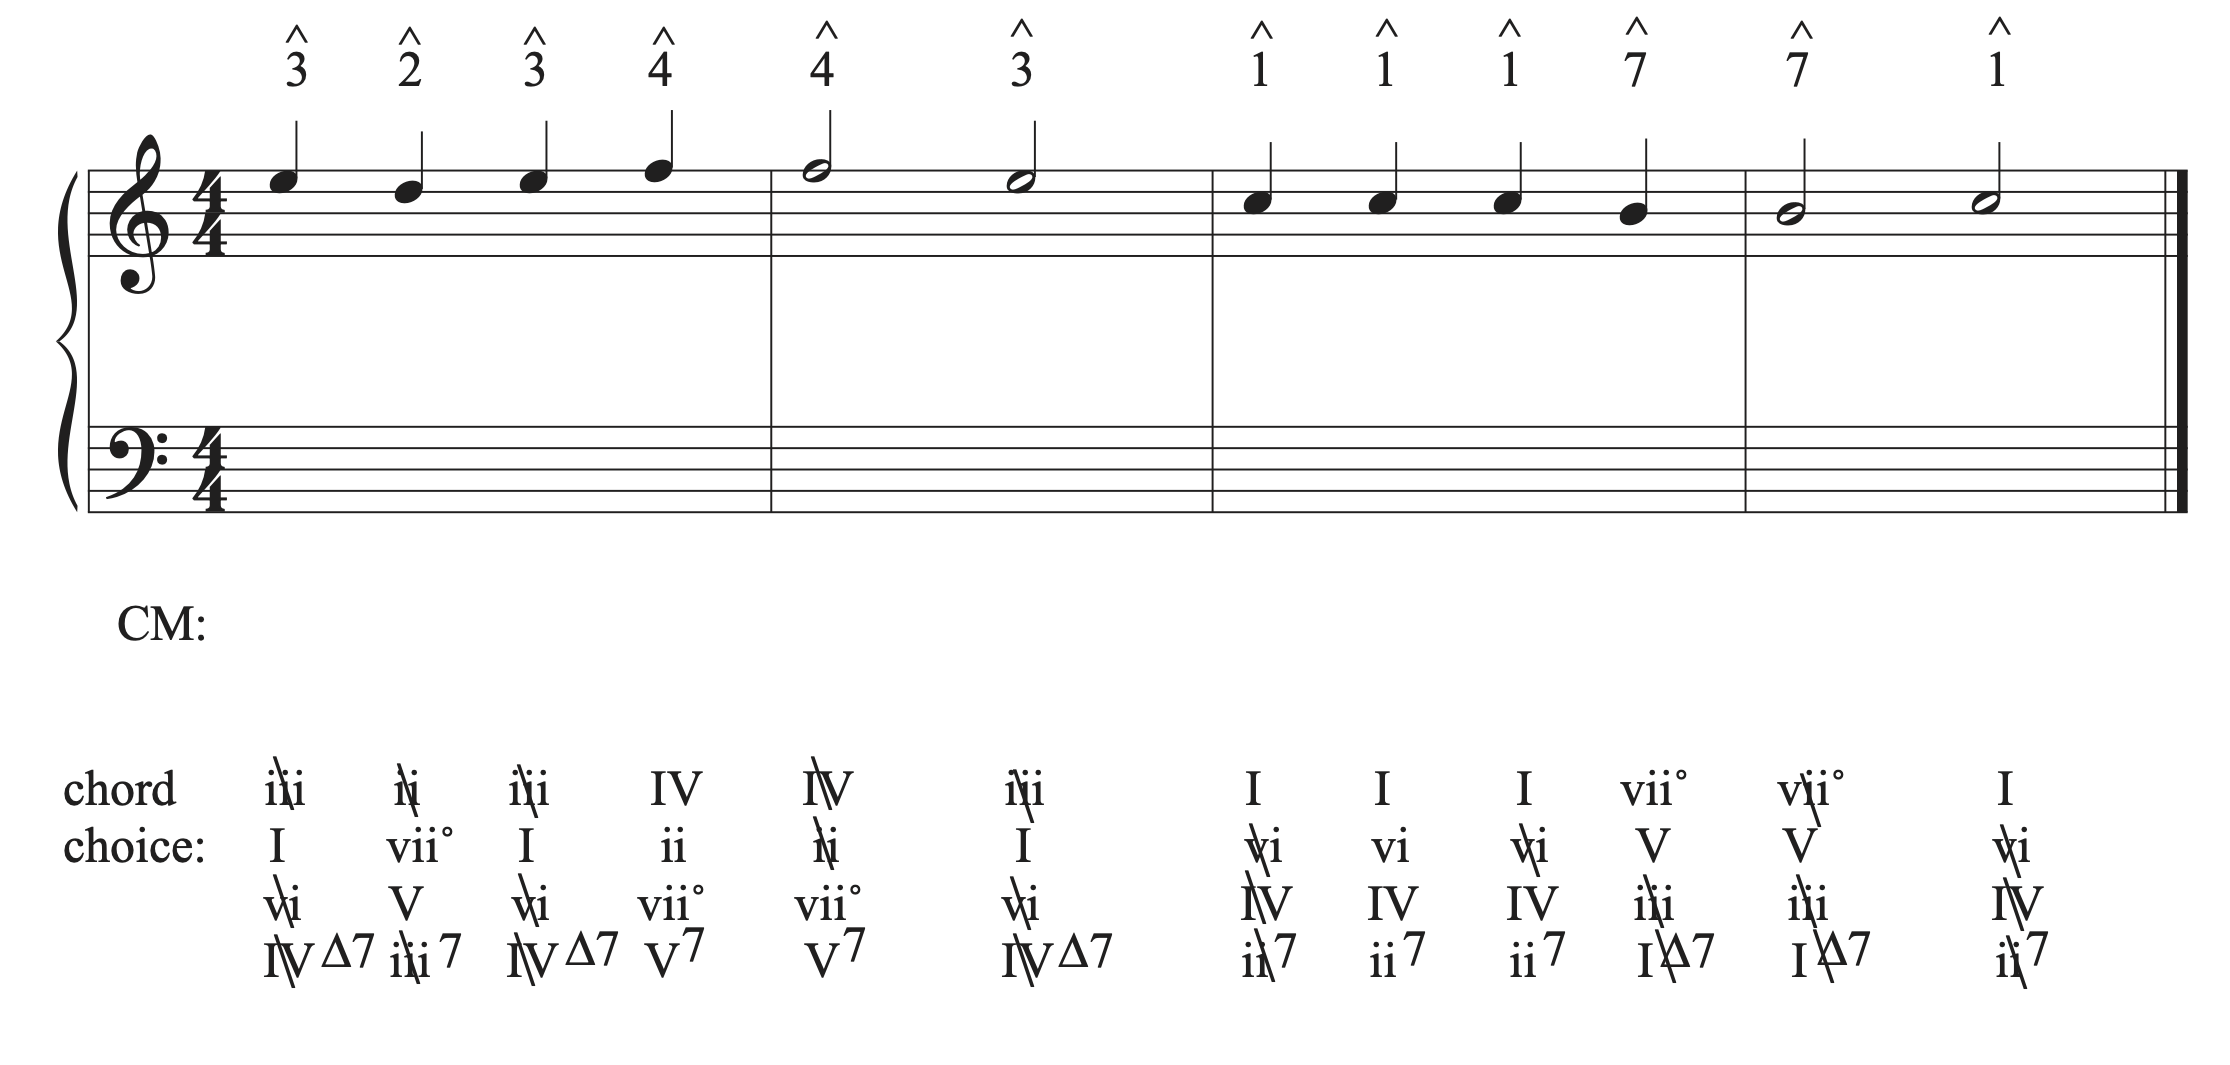 The musical example in C major with chord possibilities eliminated.